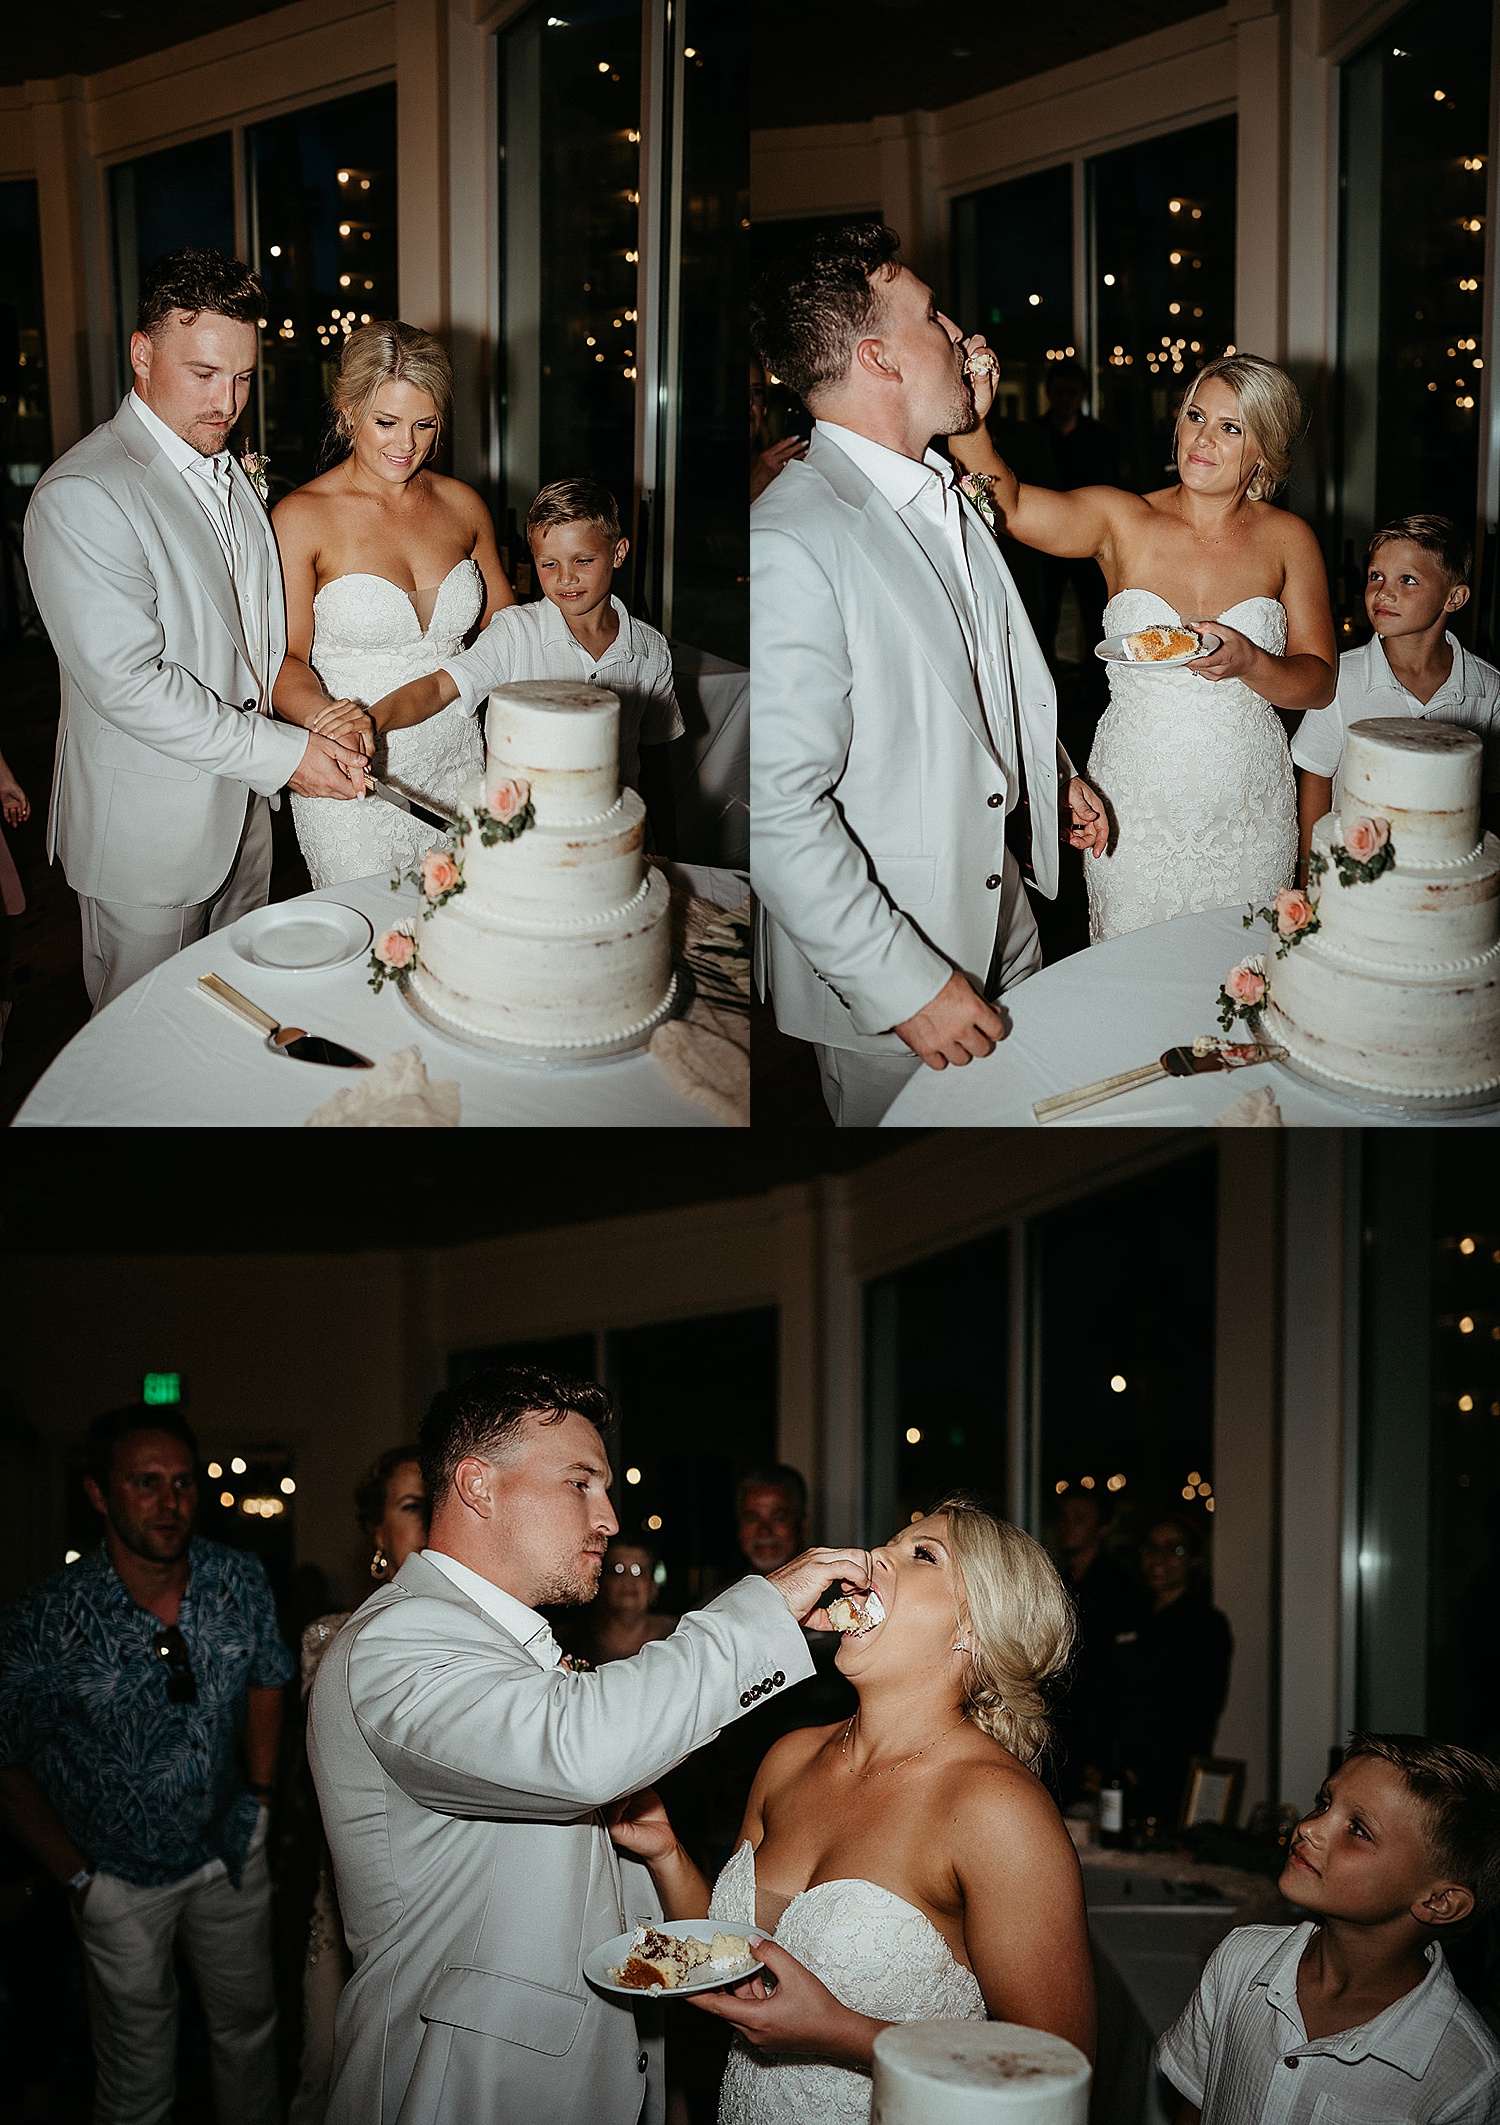 The Island Resort wedding reception with cake cutting with bride and groom 